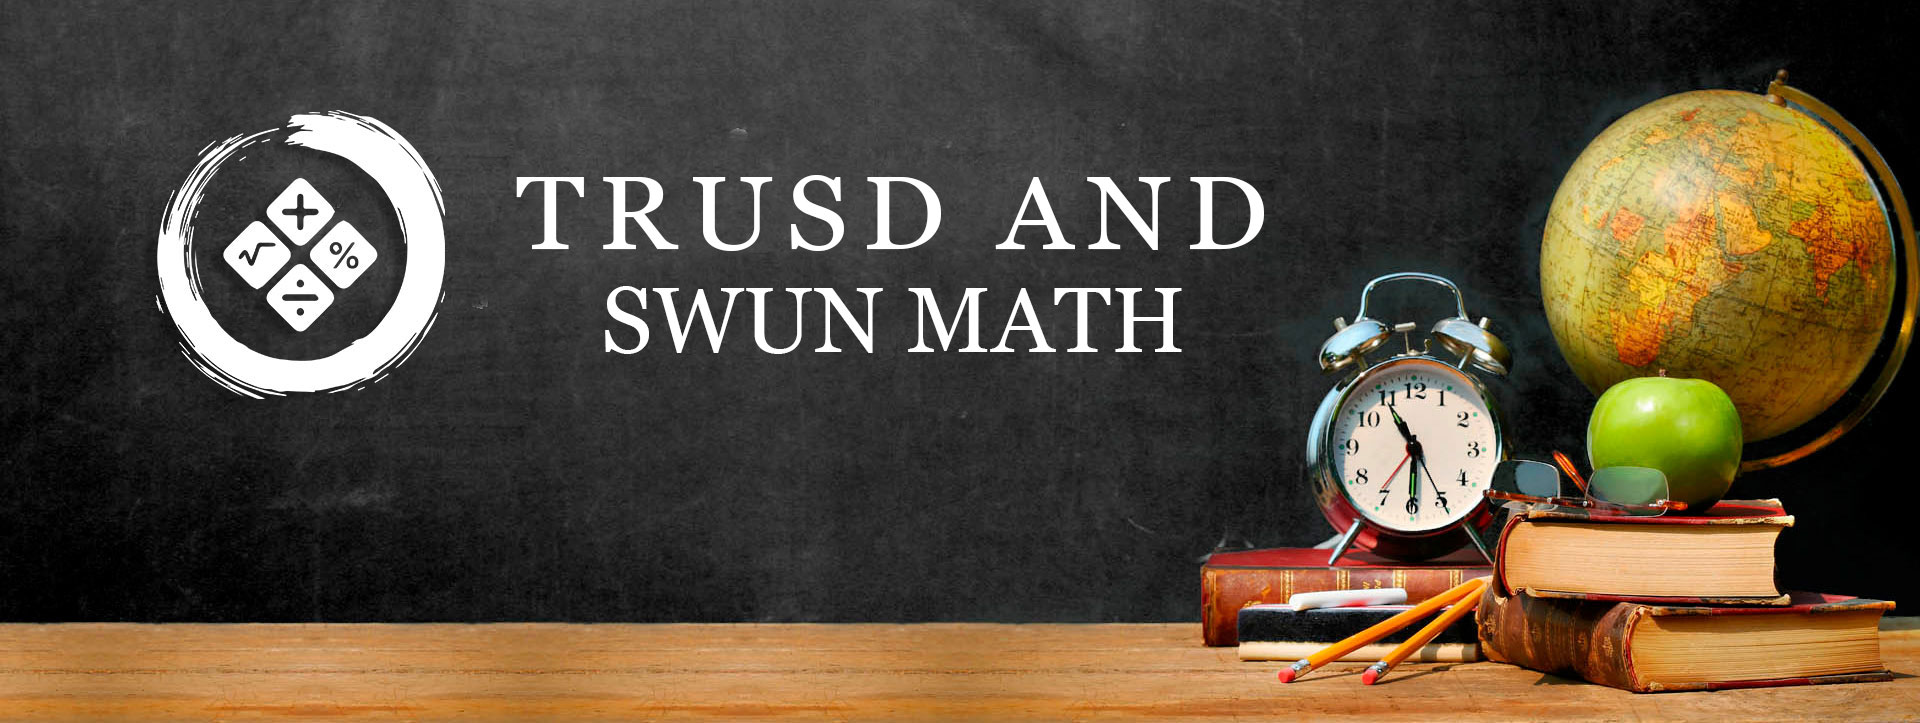 TRUSD and SWUN Math - A globe, an alarm clock, and apple and other items are sitting on a table.